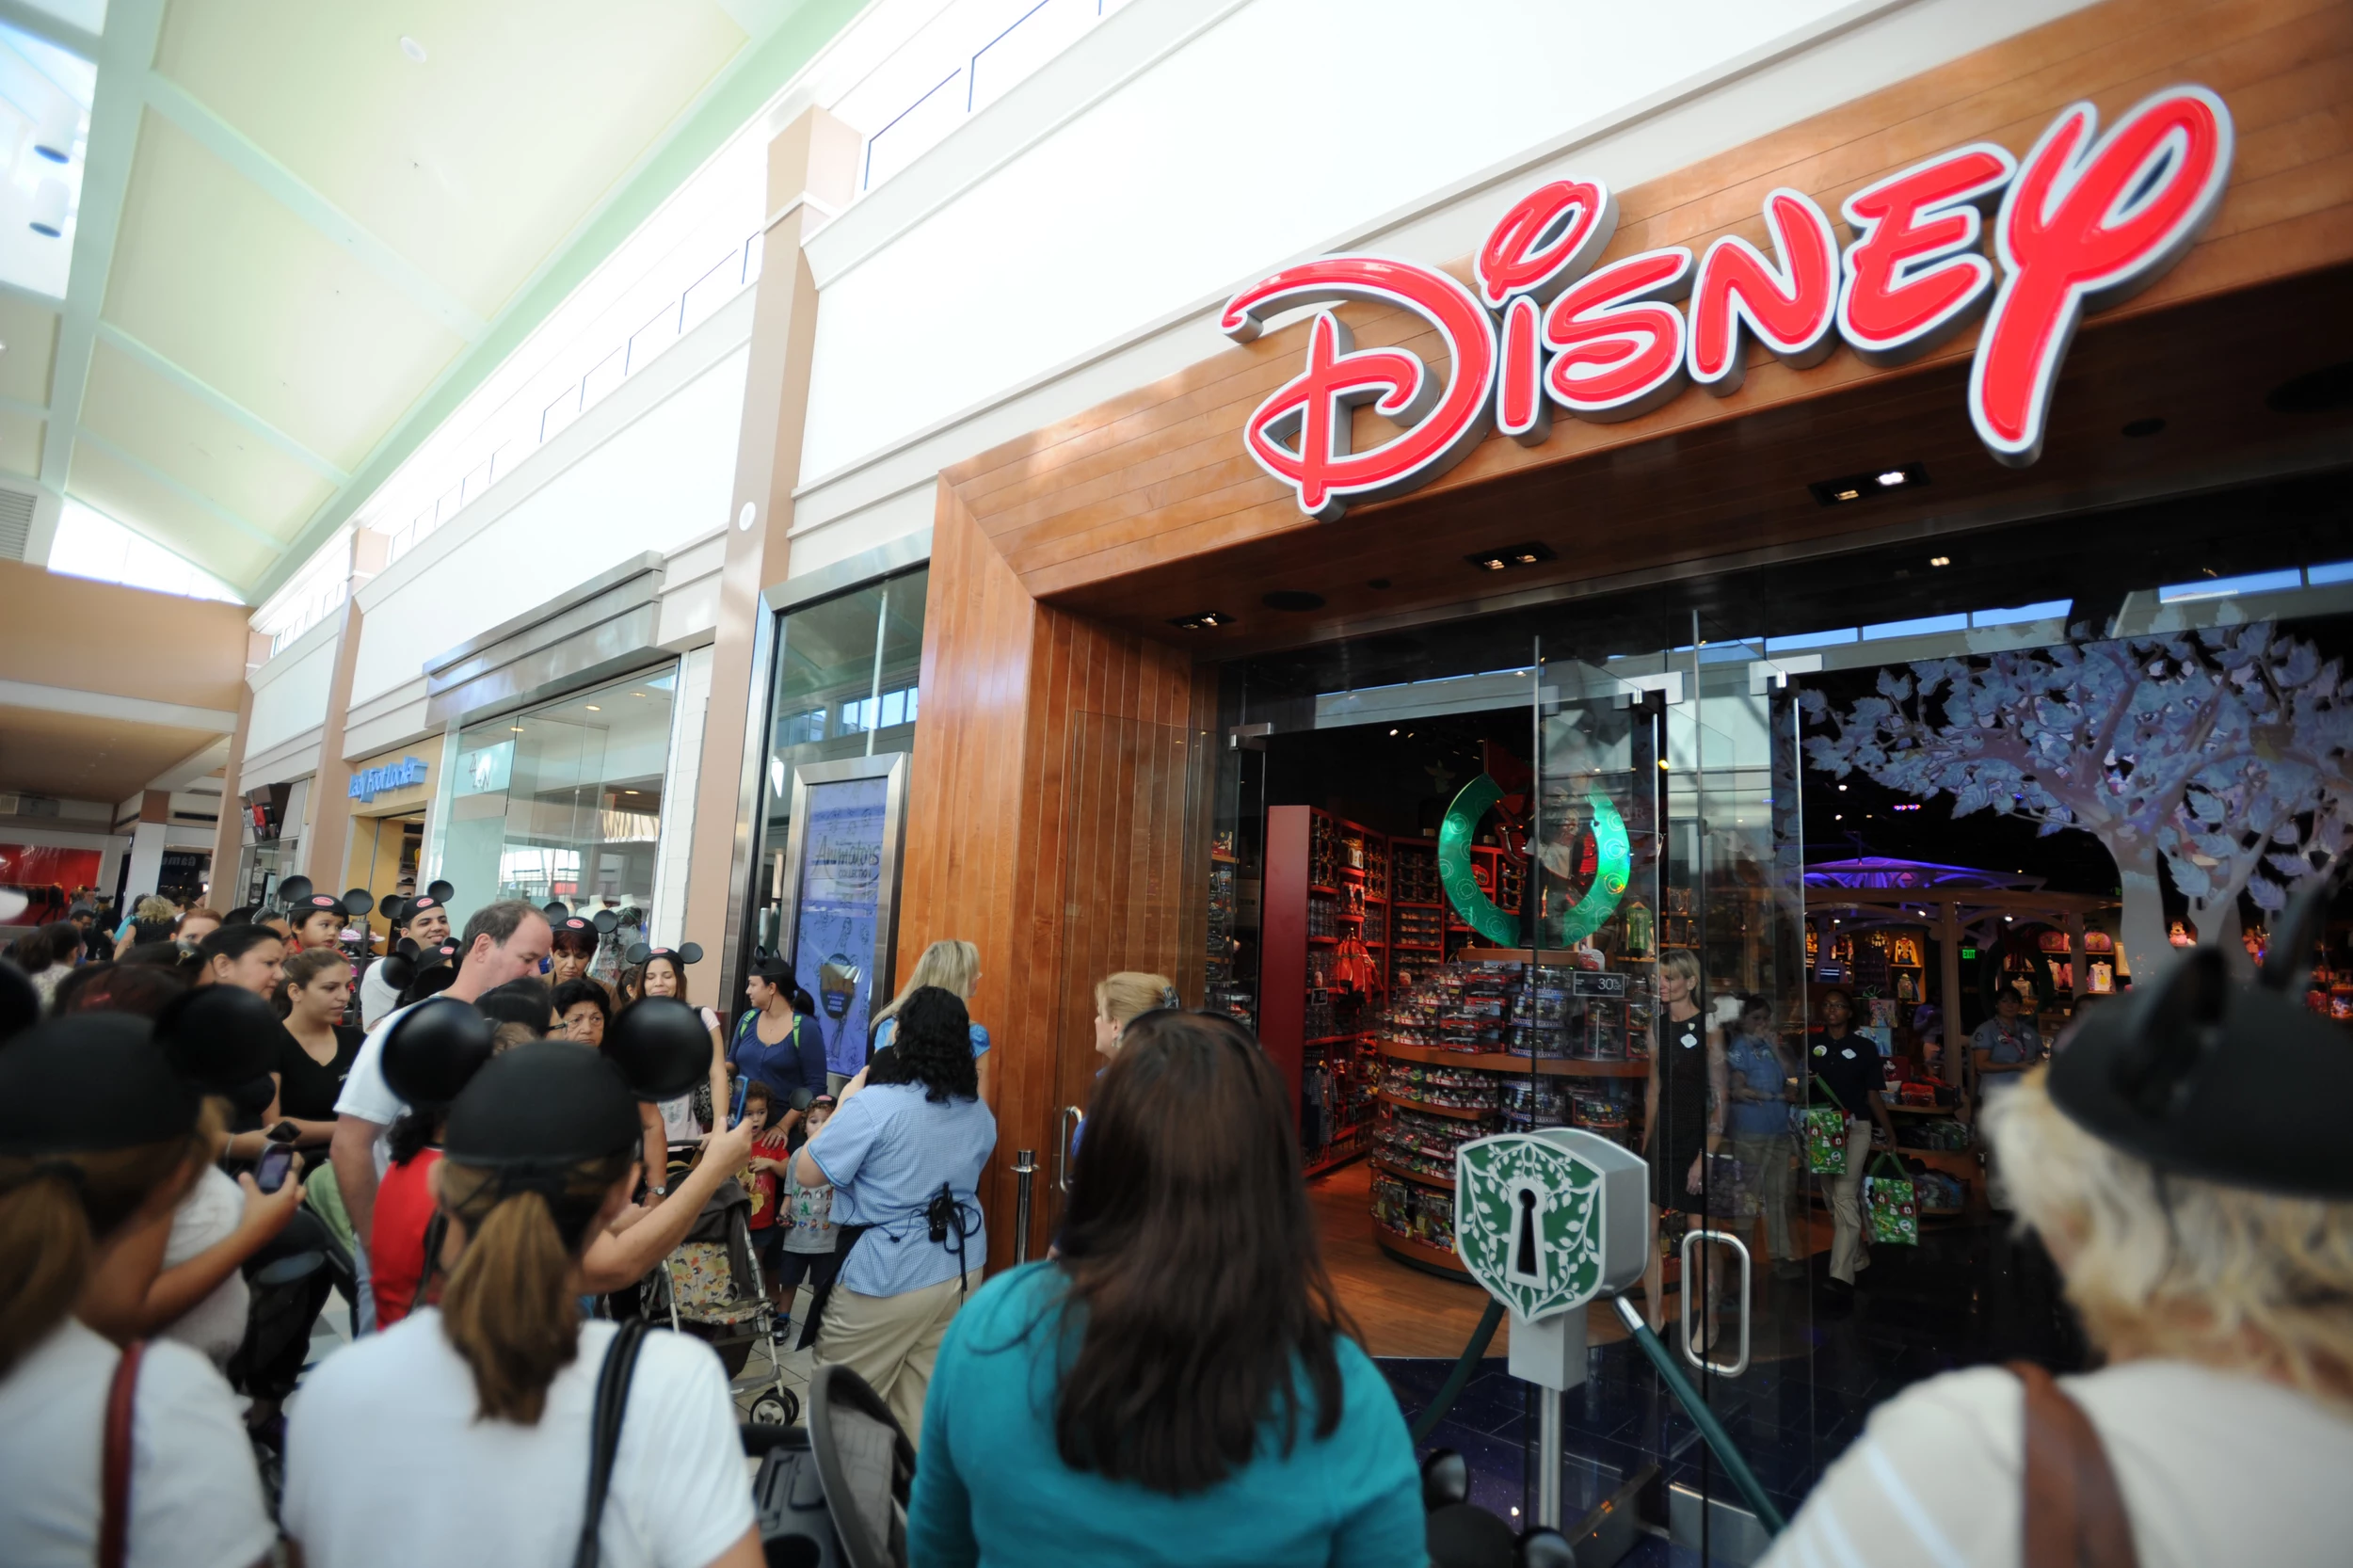 Markér locker Meddele Is The Niagara Falls Disney Store at the Fashion Outlets Closing?